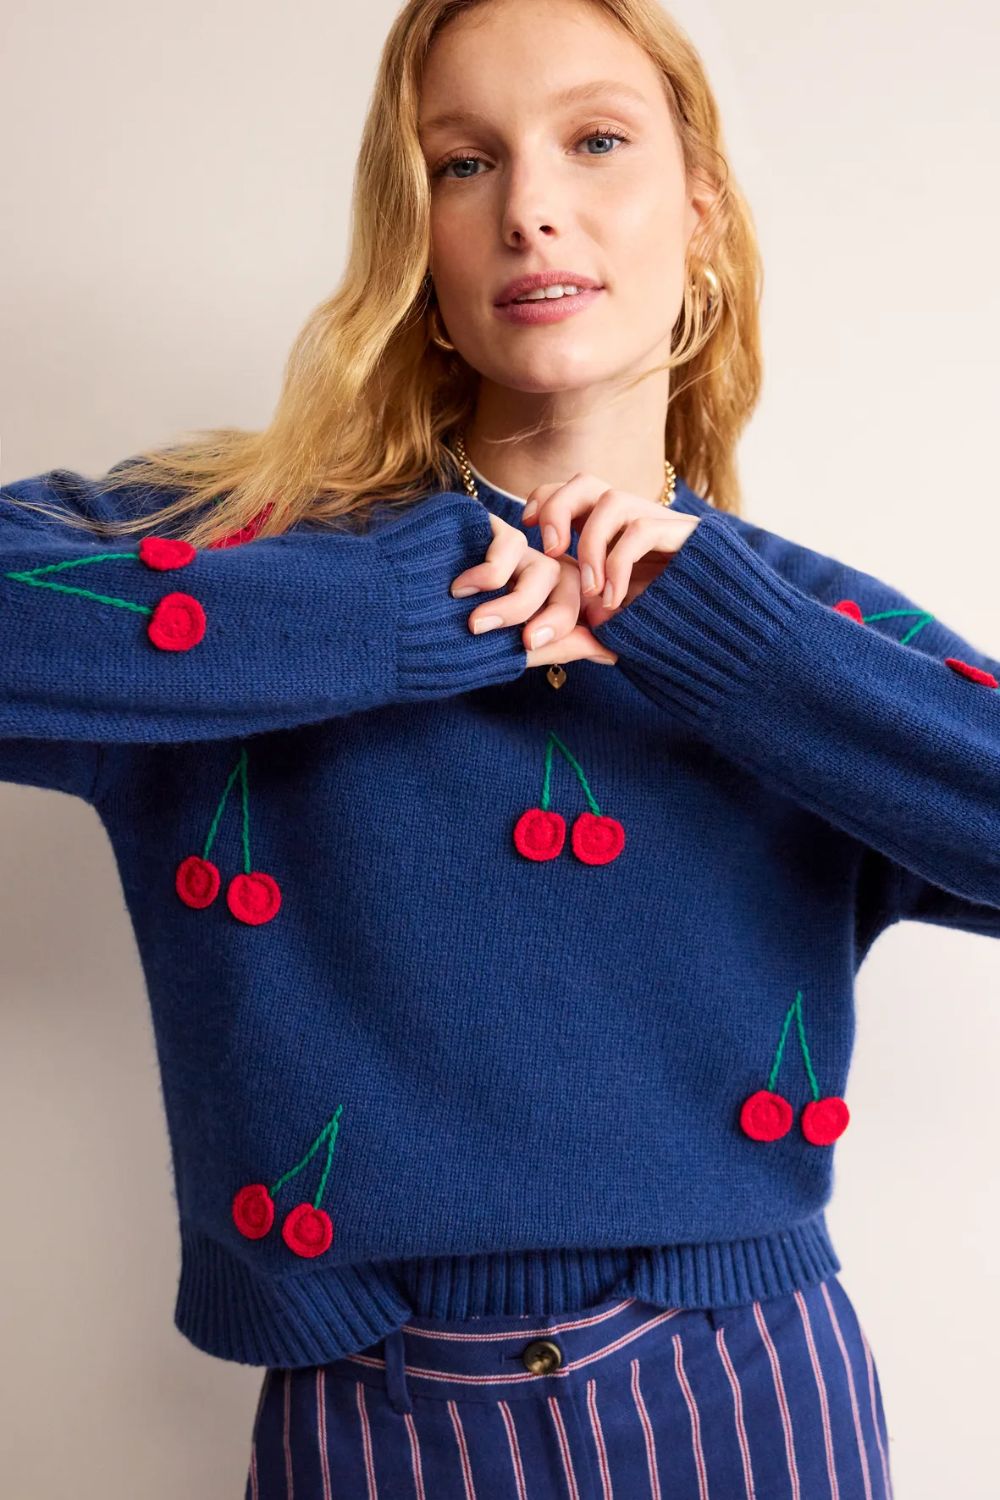 my perfect red cardigan is currently on sale—along with all of boden’s new-in bits